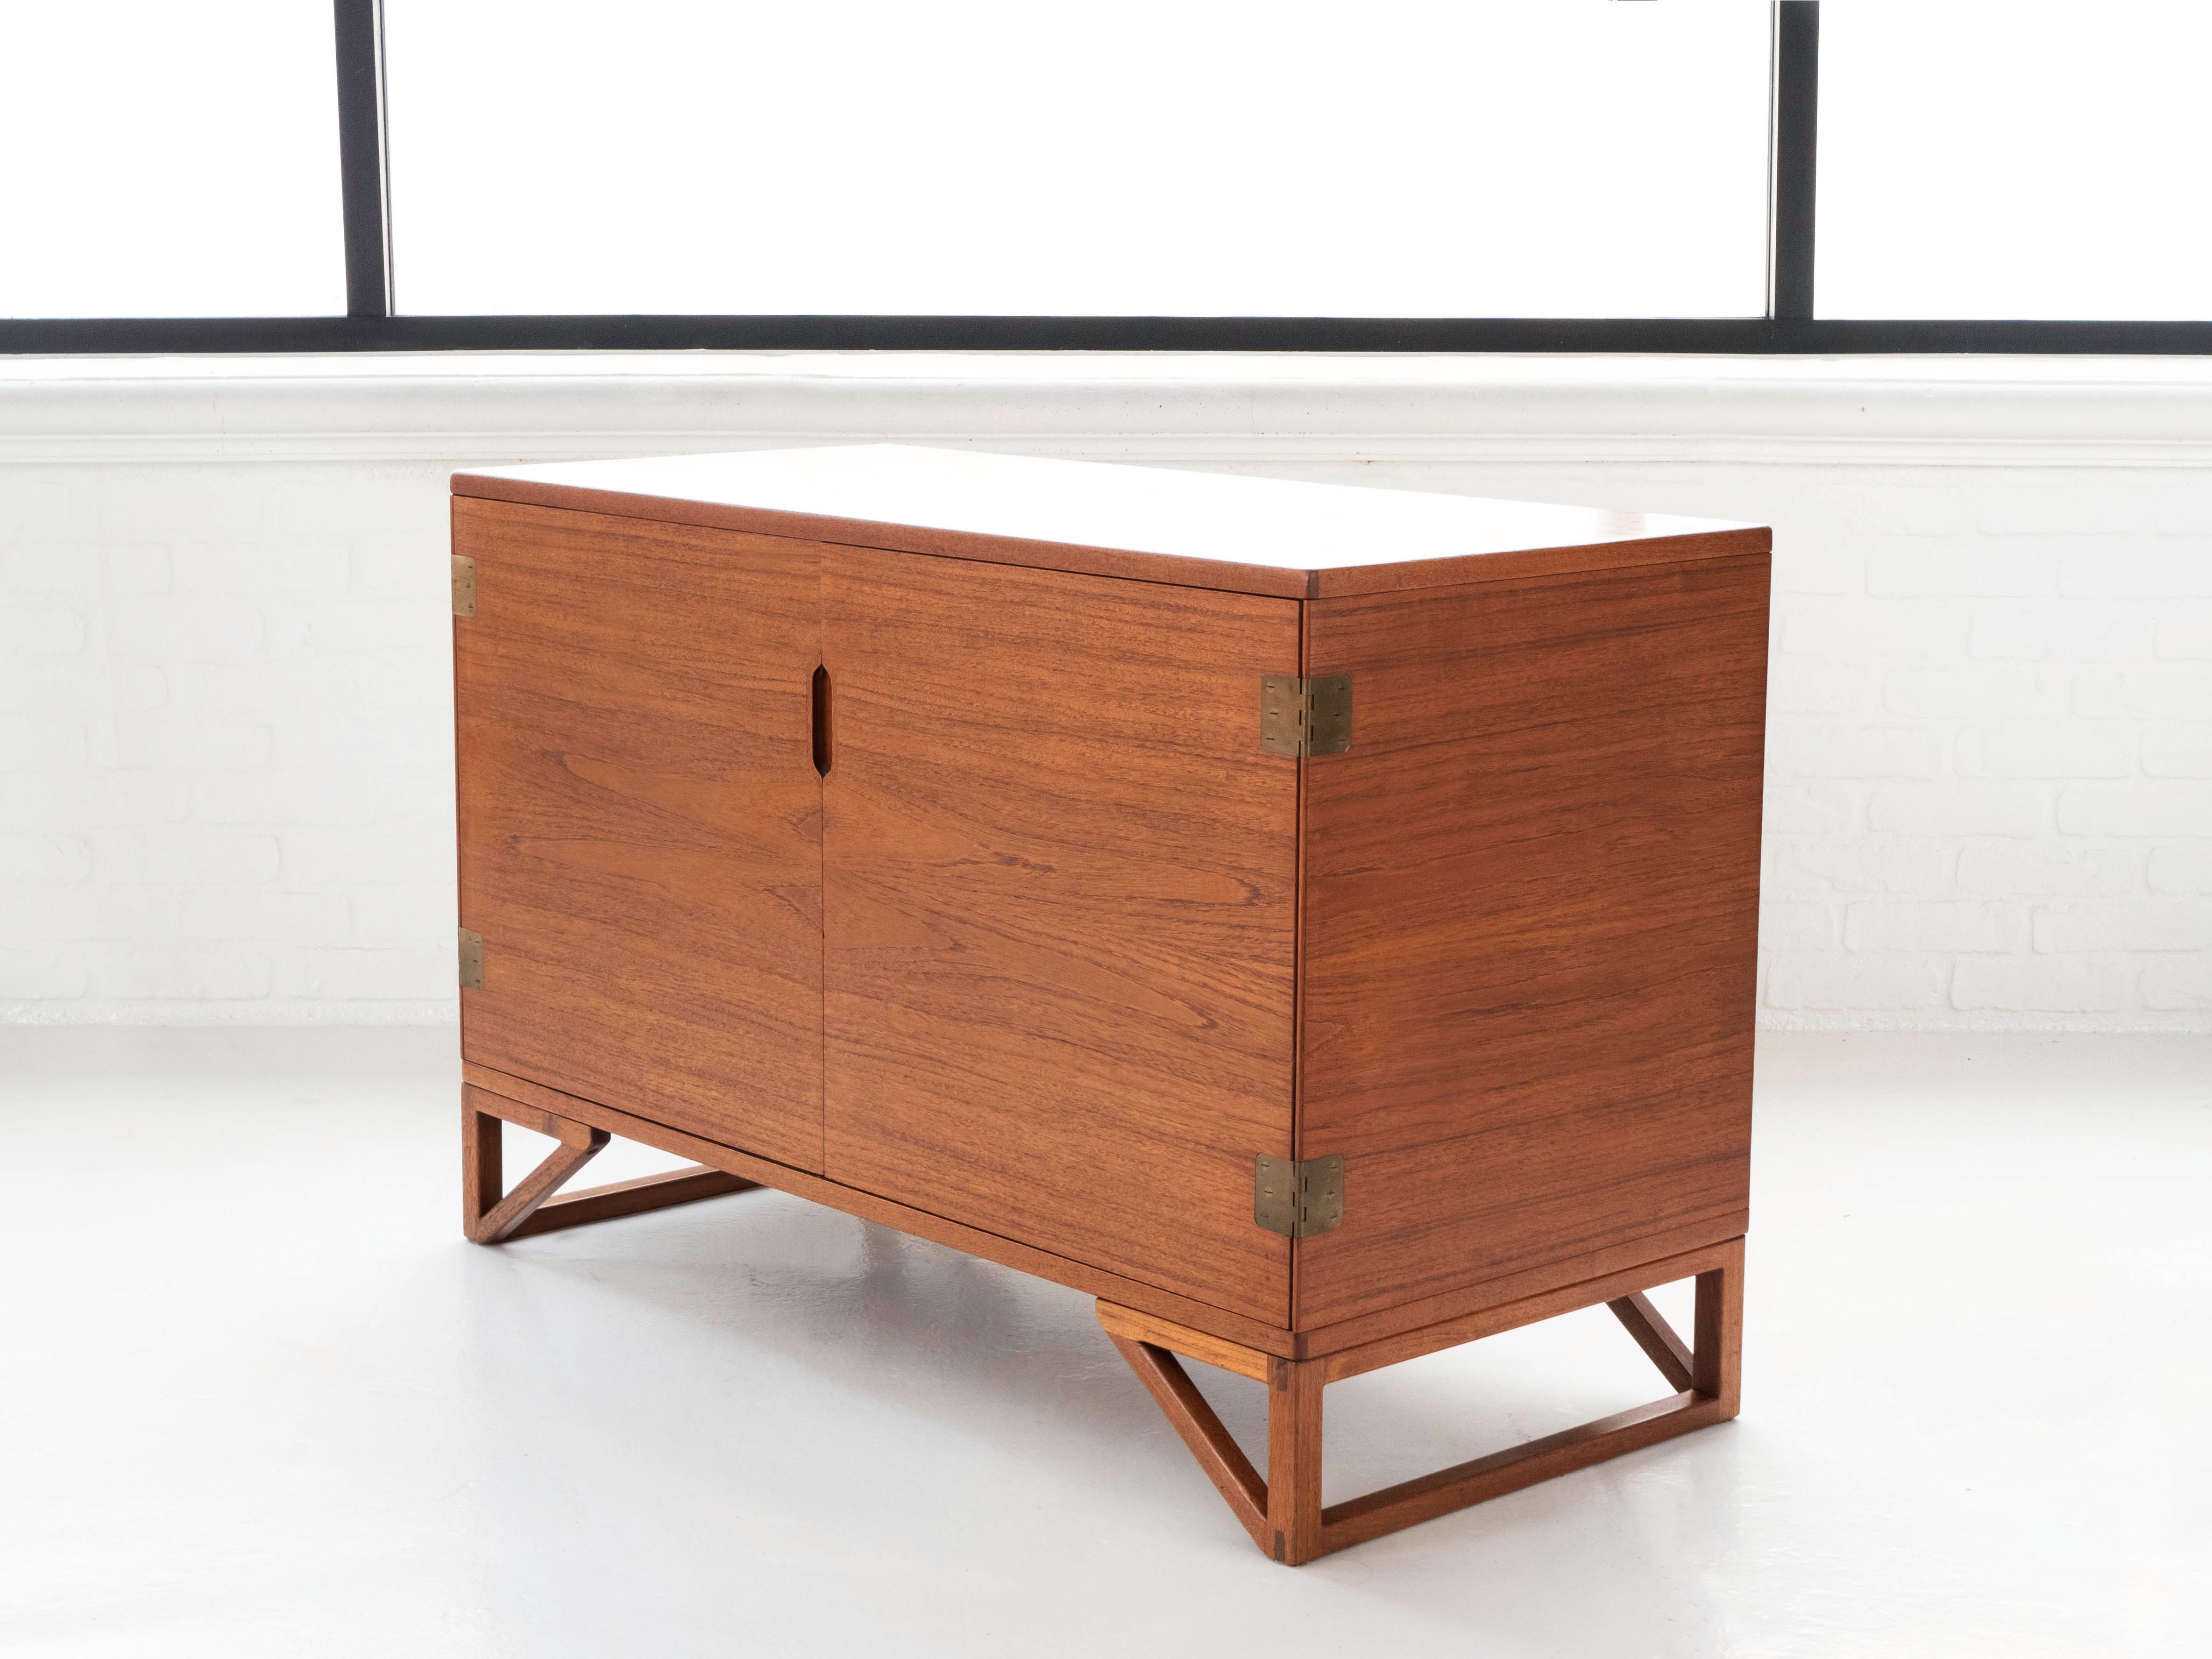 Svend Langkilde petite cabinet for Illums Bolighus.  Produced by Langkilde Mobler, Denmark 1960's.

The teak wood grain is bookmatched on all sides.  The interior of this two-door cabinet includes 4 pull out drawers on one side, with adjustable